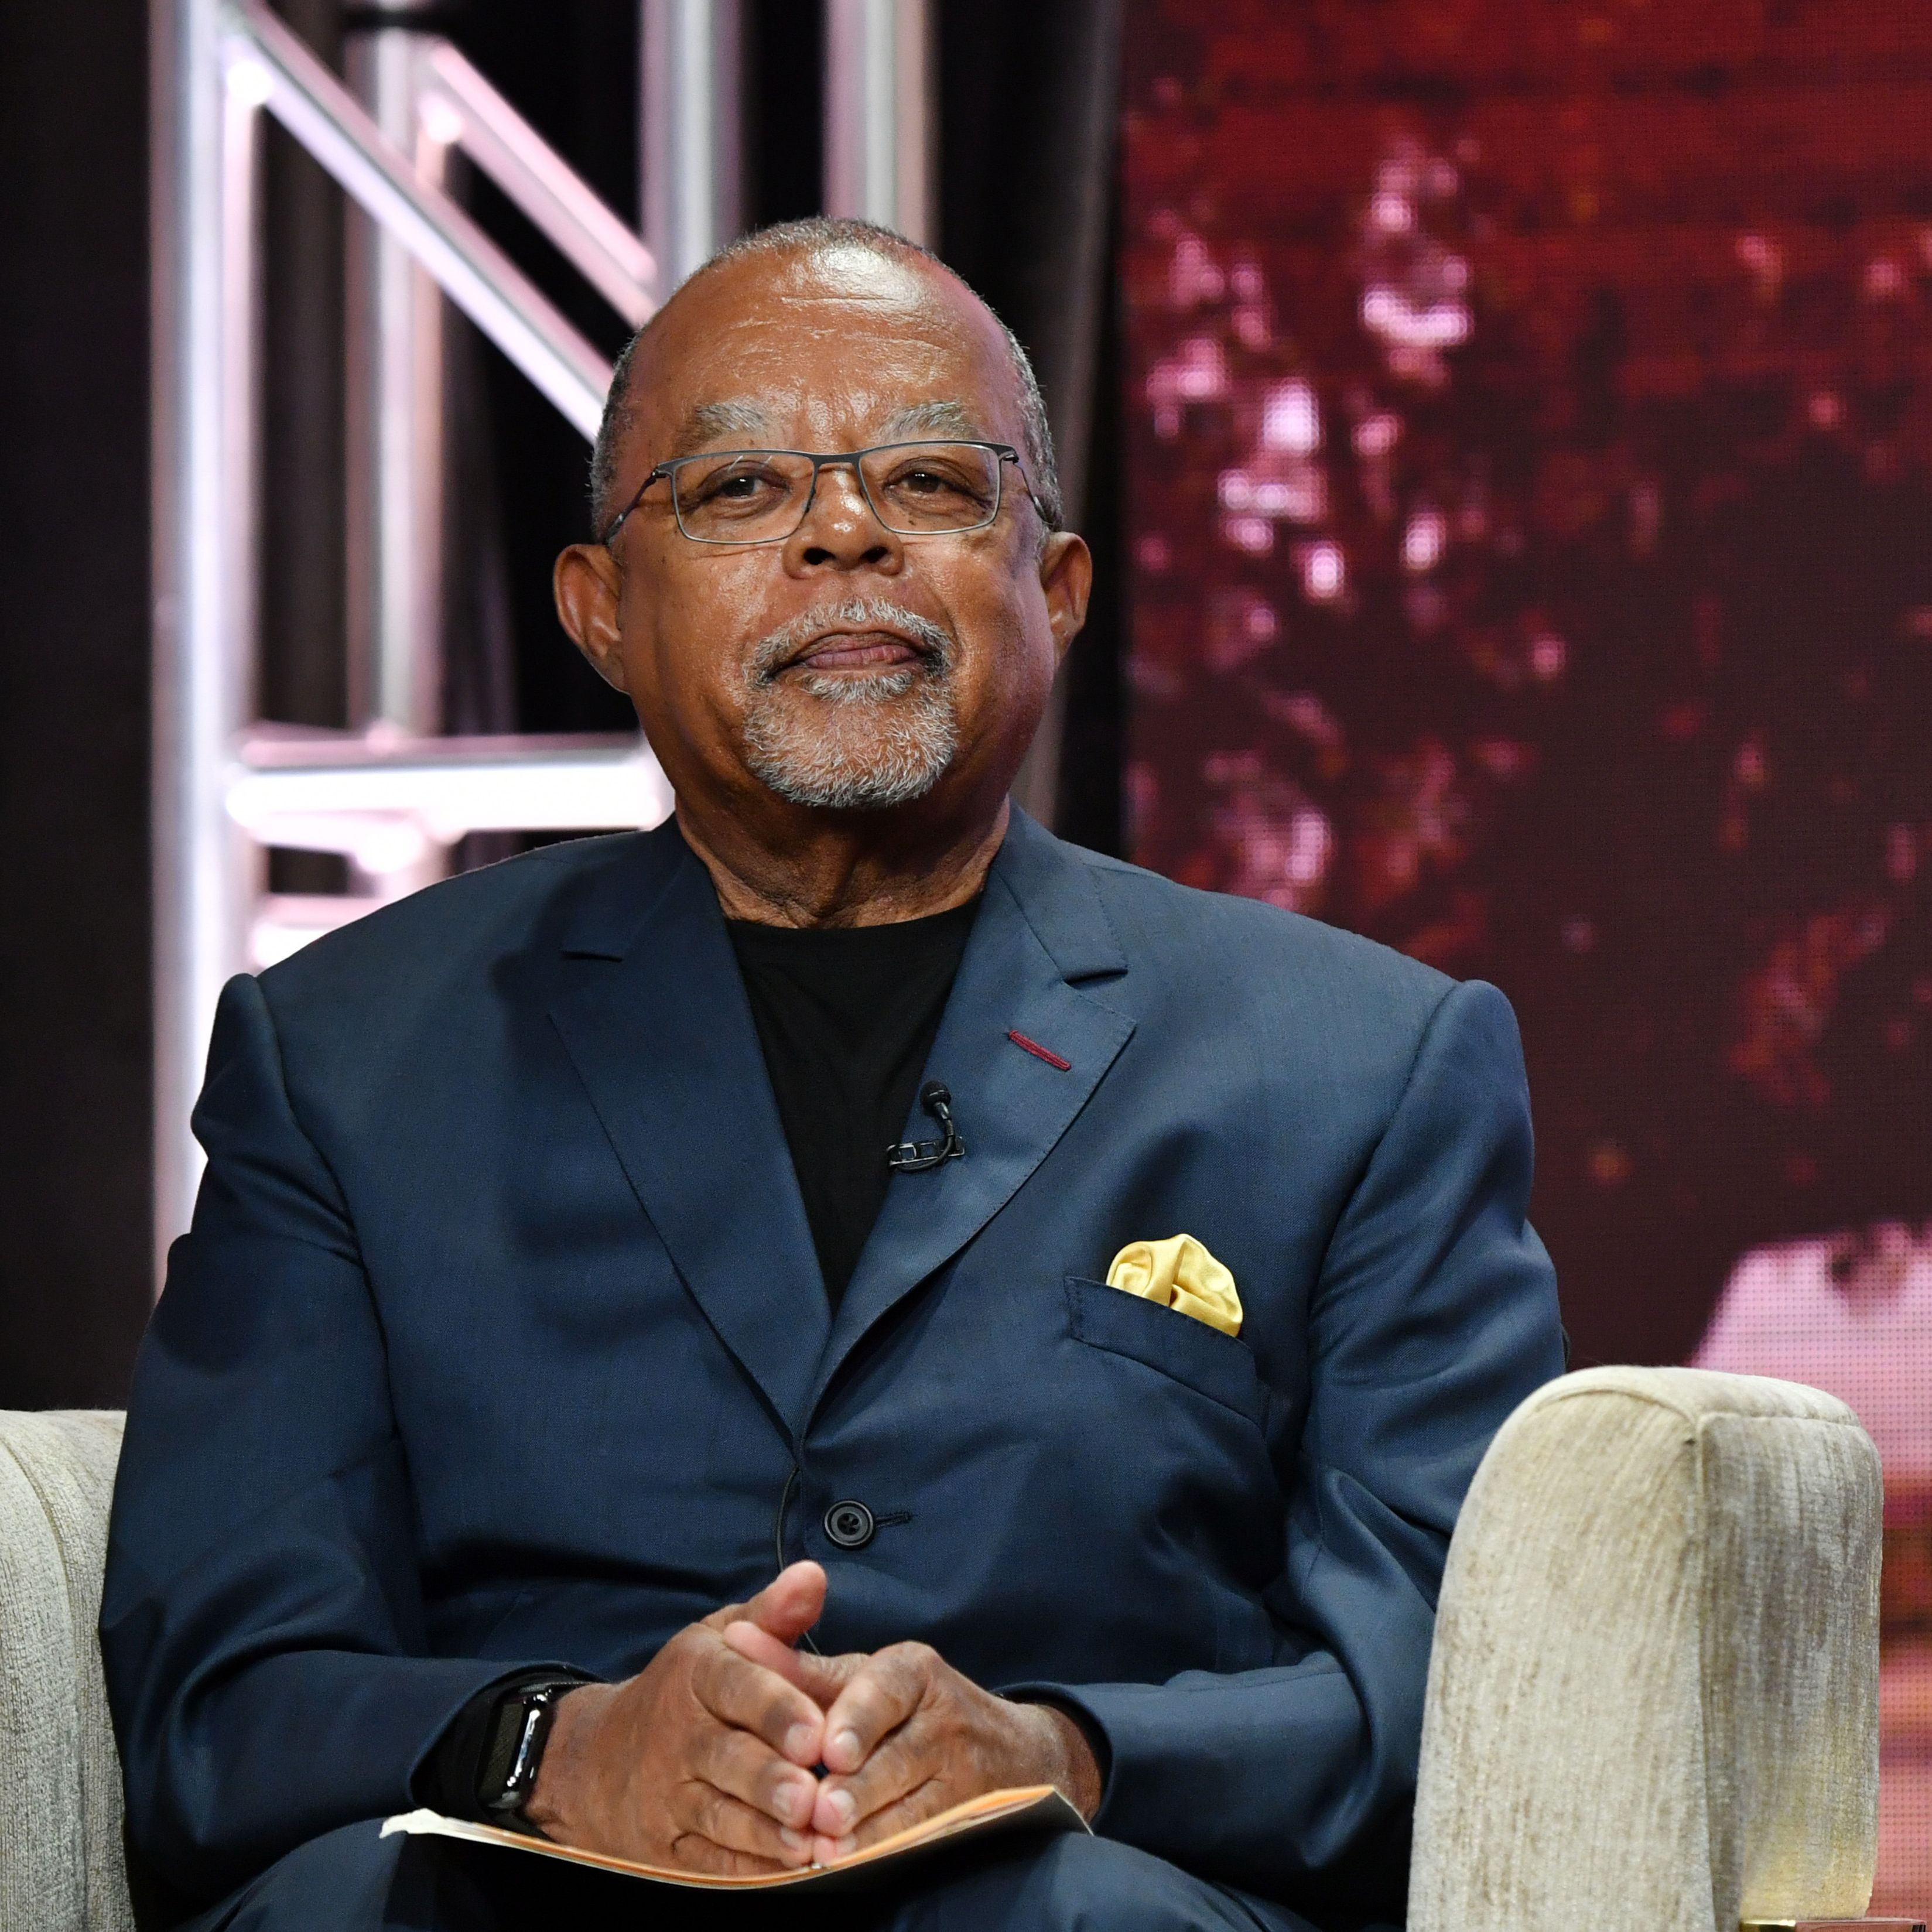 His　Jr.　Series,　Reveals　Historian　TV　Details　and　Book　New　The　Gates,　Louis　Henry　Church　of　Black